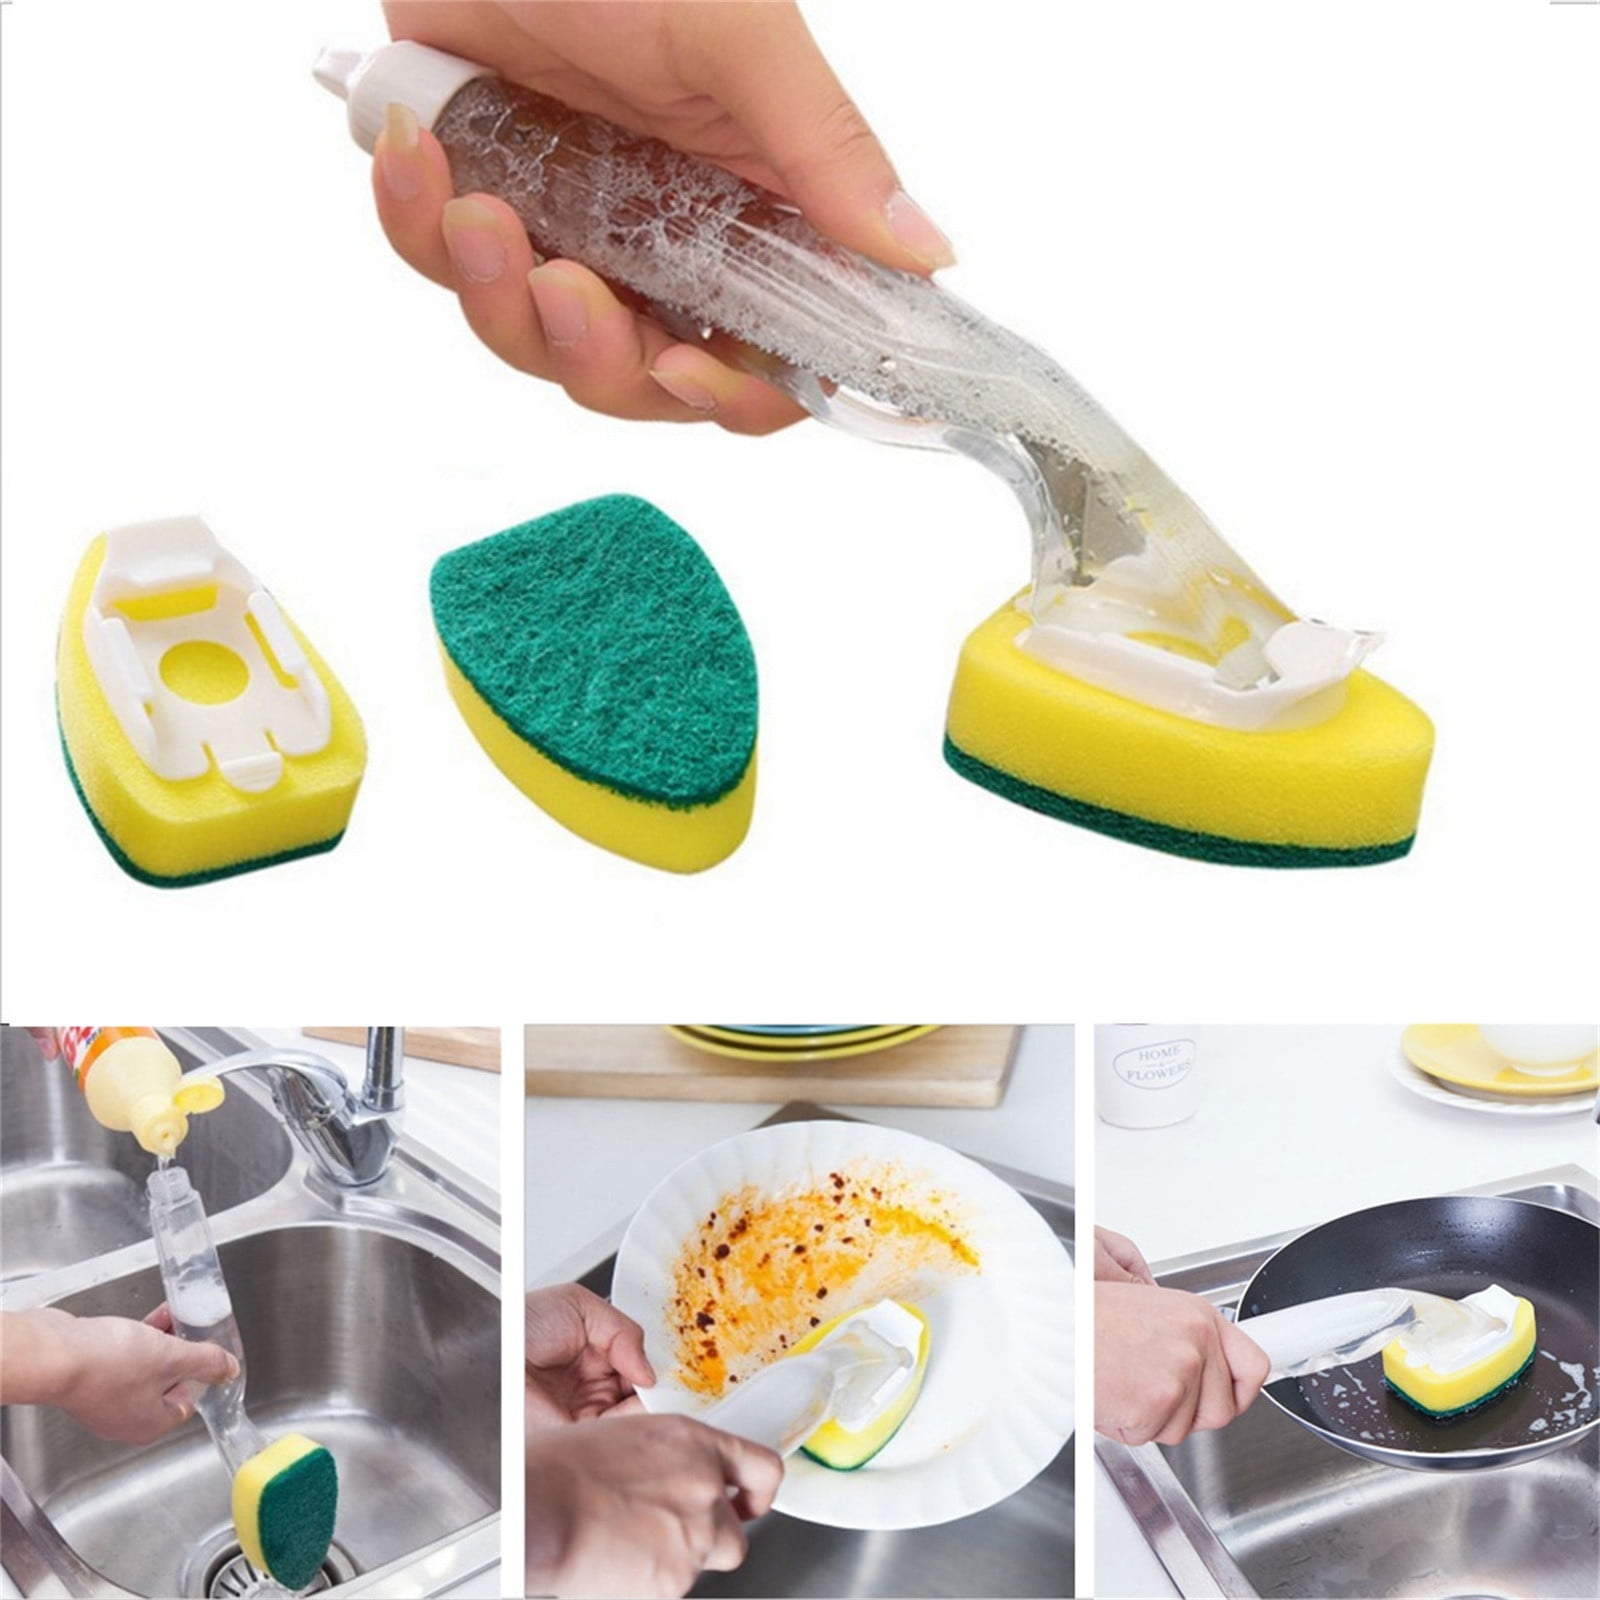 OAVQHLG3B Dish Brush with Soap Dispenser Dish Scrubber with